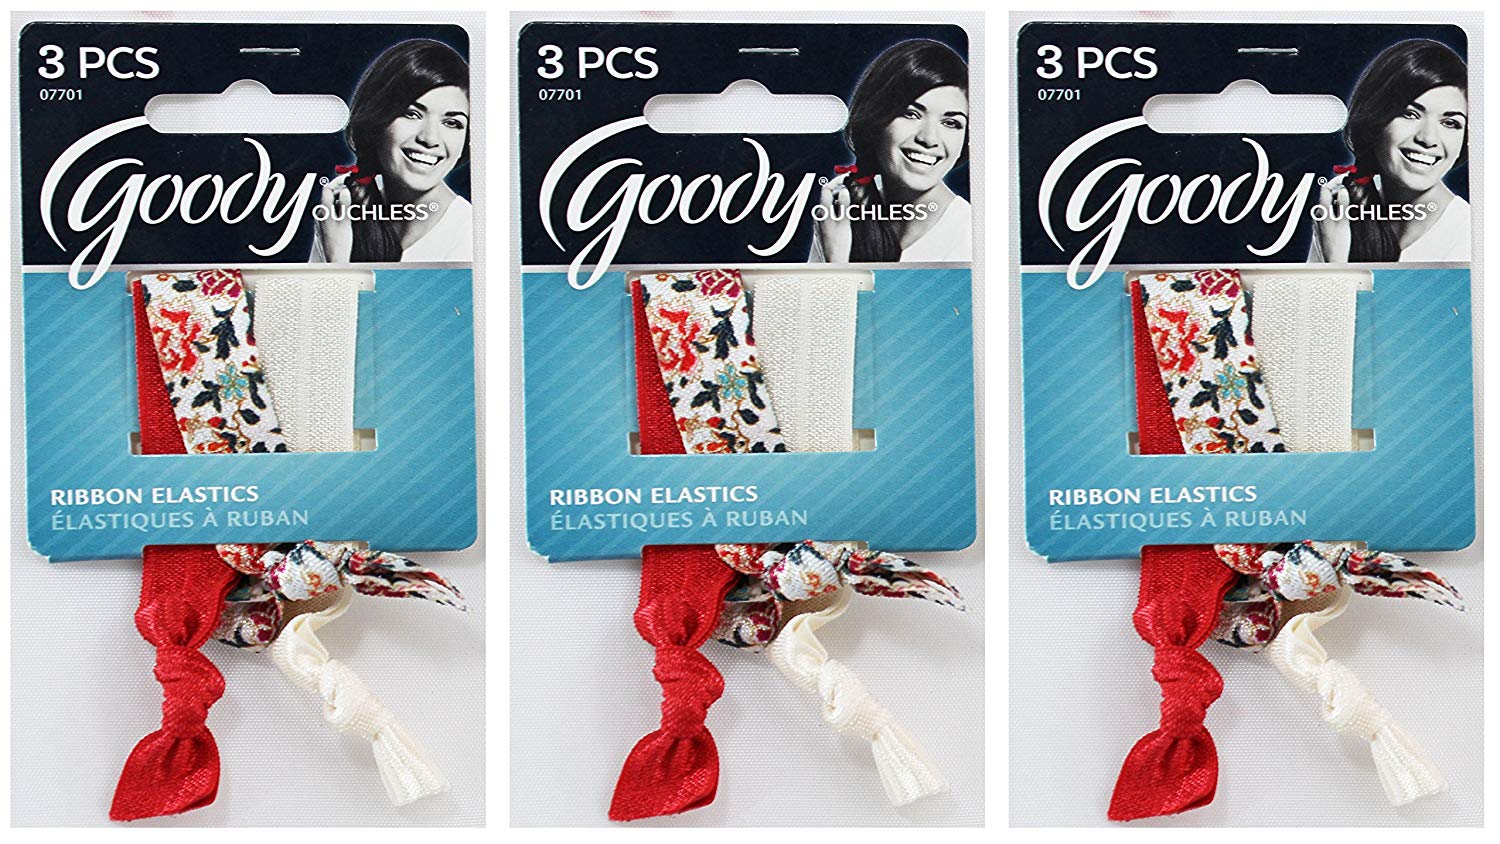 Goody WoMens Ouchless Ribbon Elastics, Vintage Floral White, 3 Count - Click Image to Close